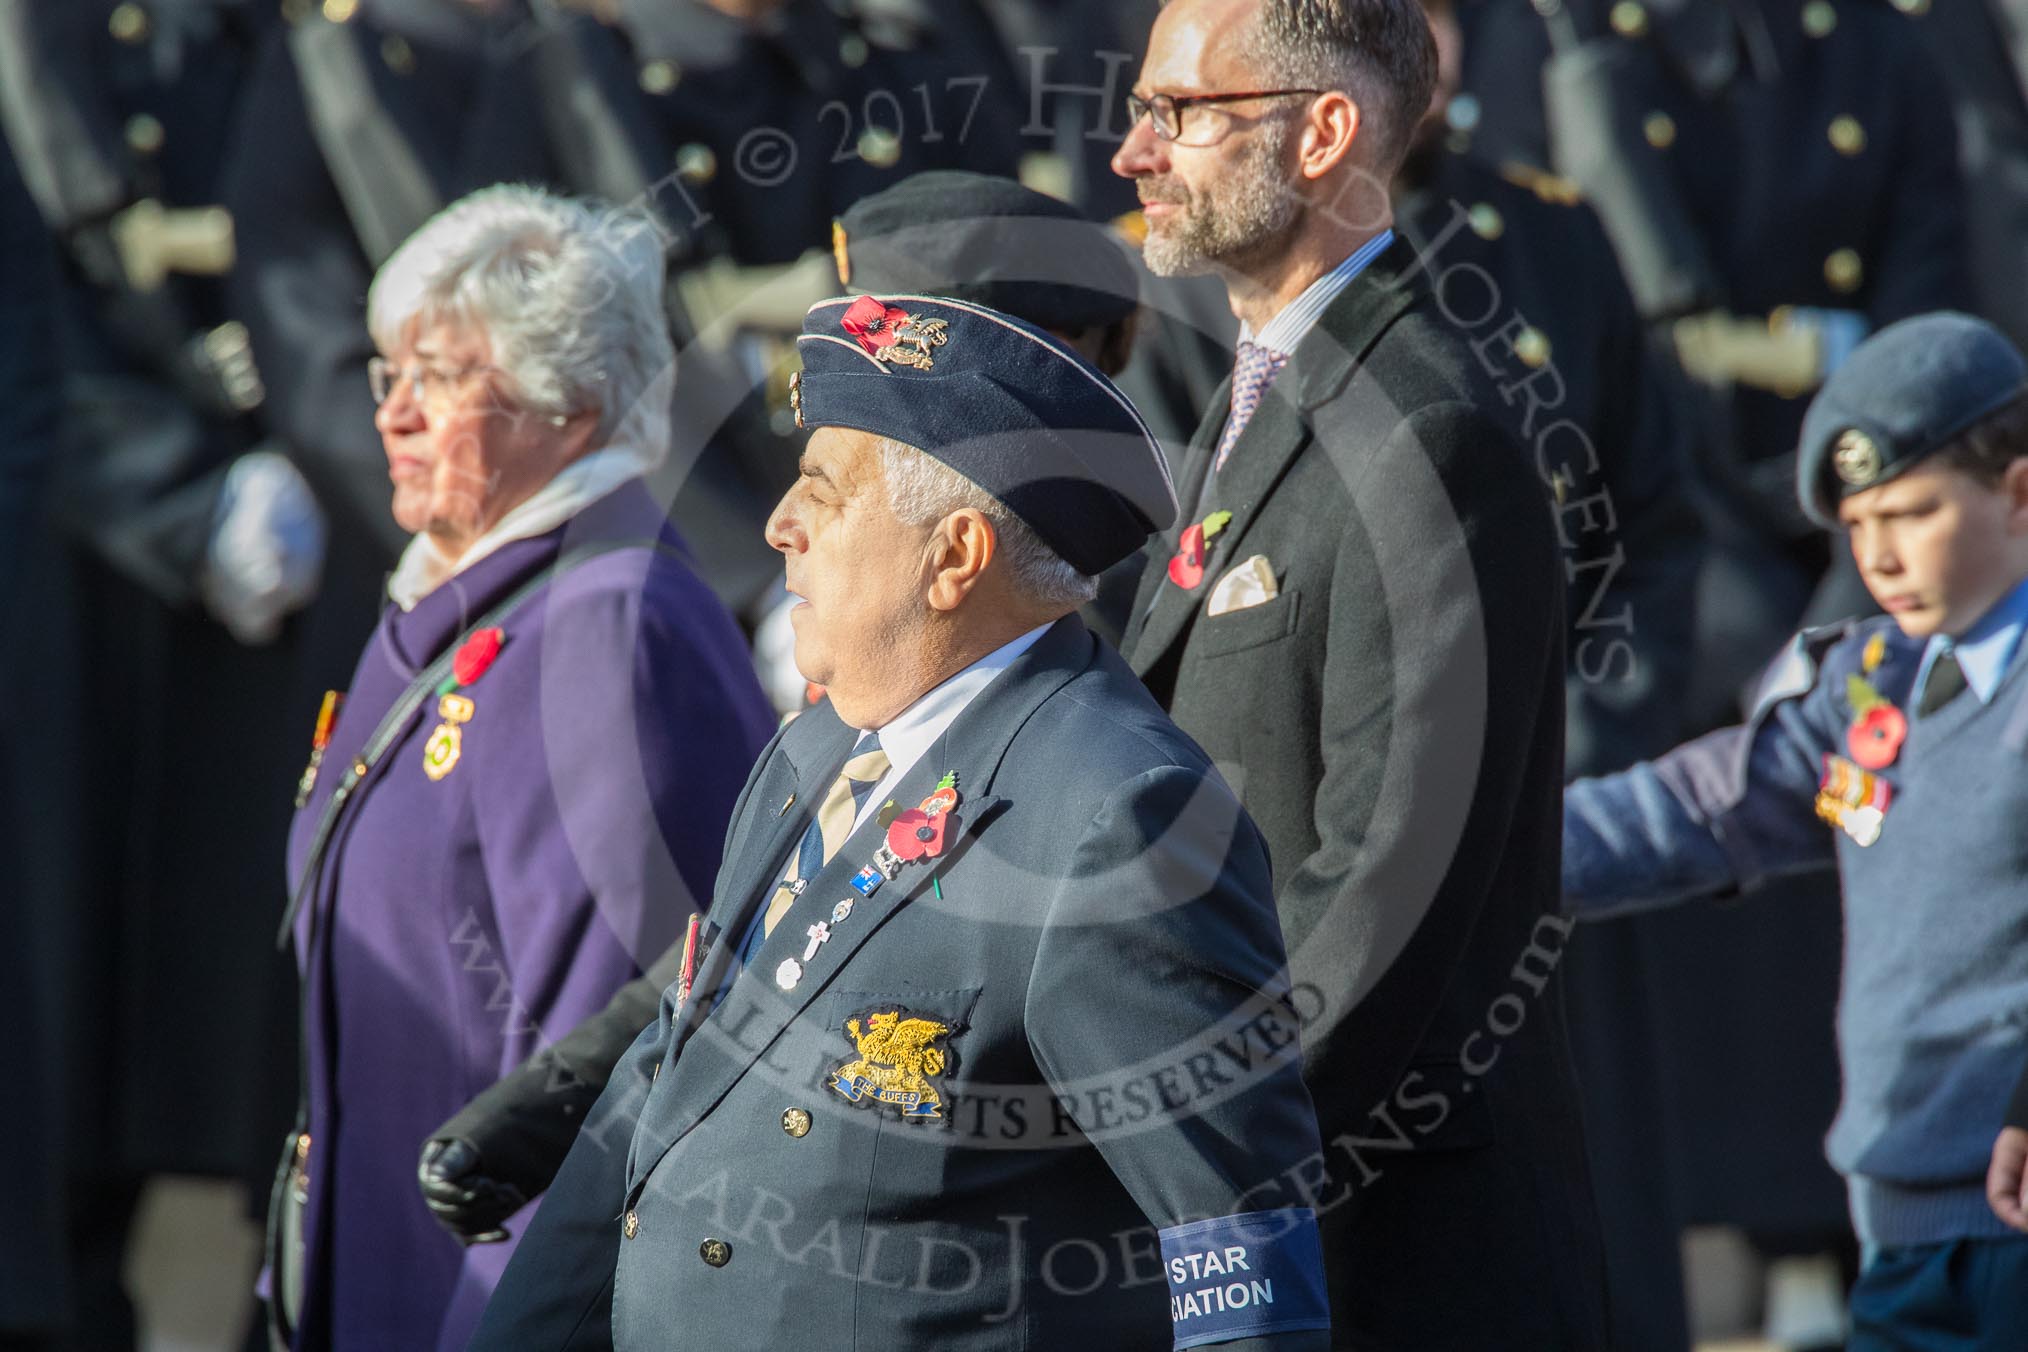 Italy Star Association  1943 - 1945 (Group F1, 29 members) during the Royal British Legion March Past on Remembrance Sunday at the Cenotaph, Whitehall, Westminster, London, 11 November 2018, 11:49.